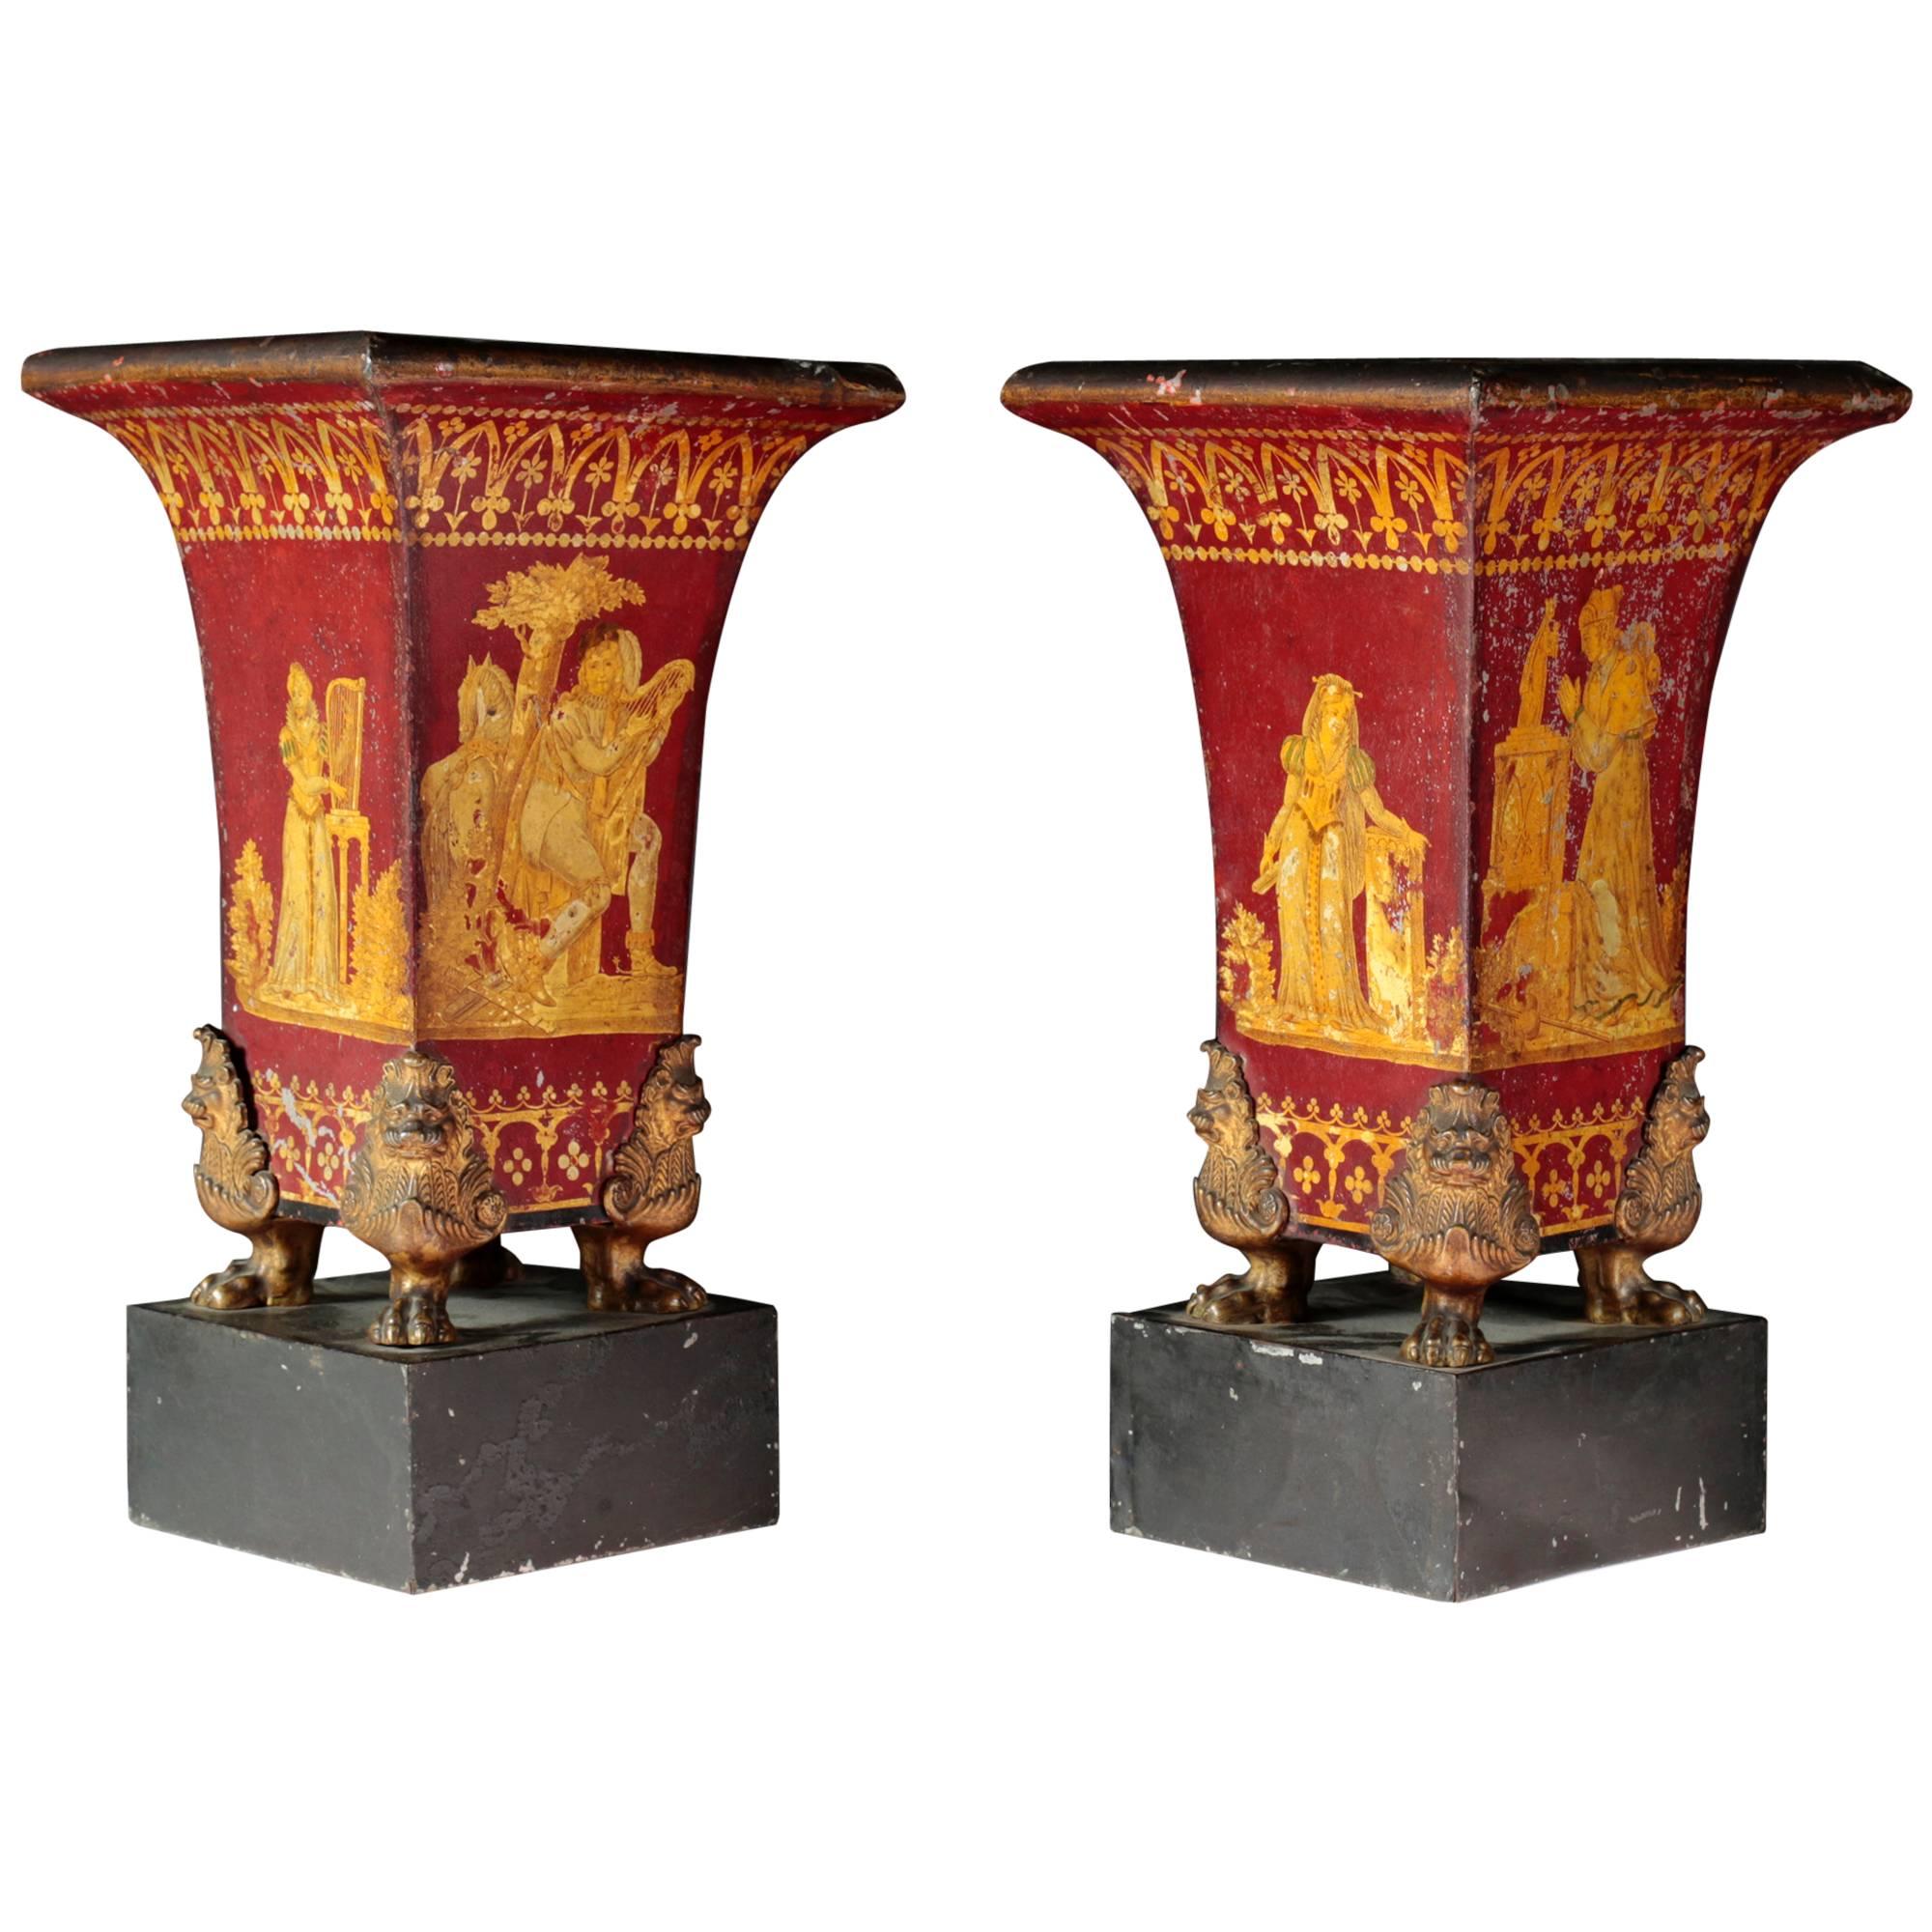 Pair of Sheet Metal Vases in Gothic Revival Style, 19th Century For Sale